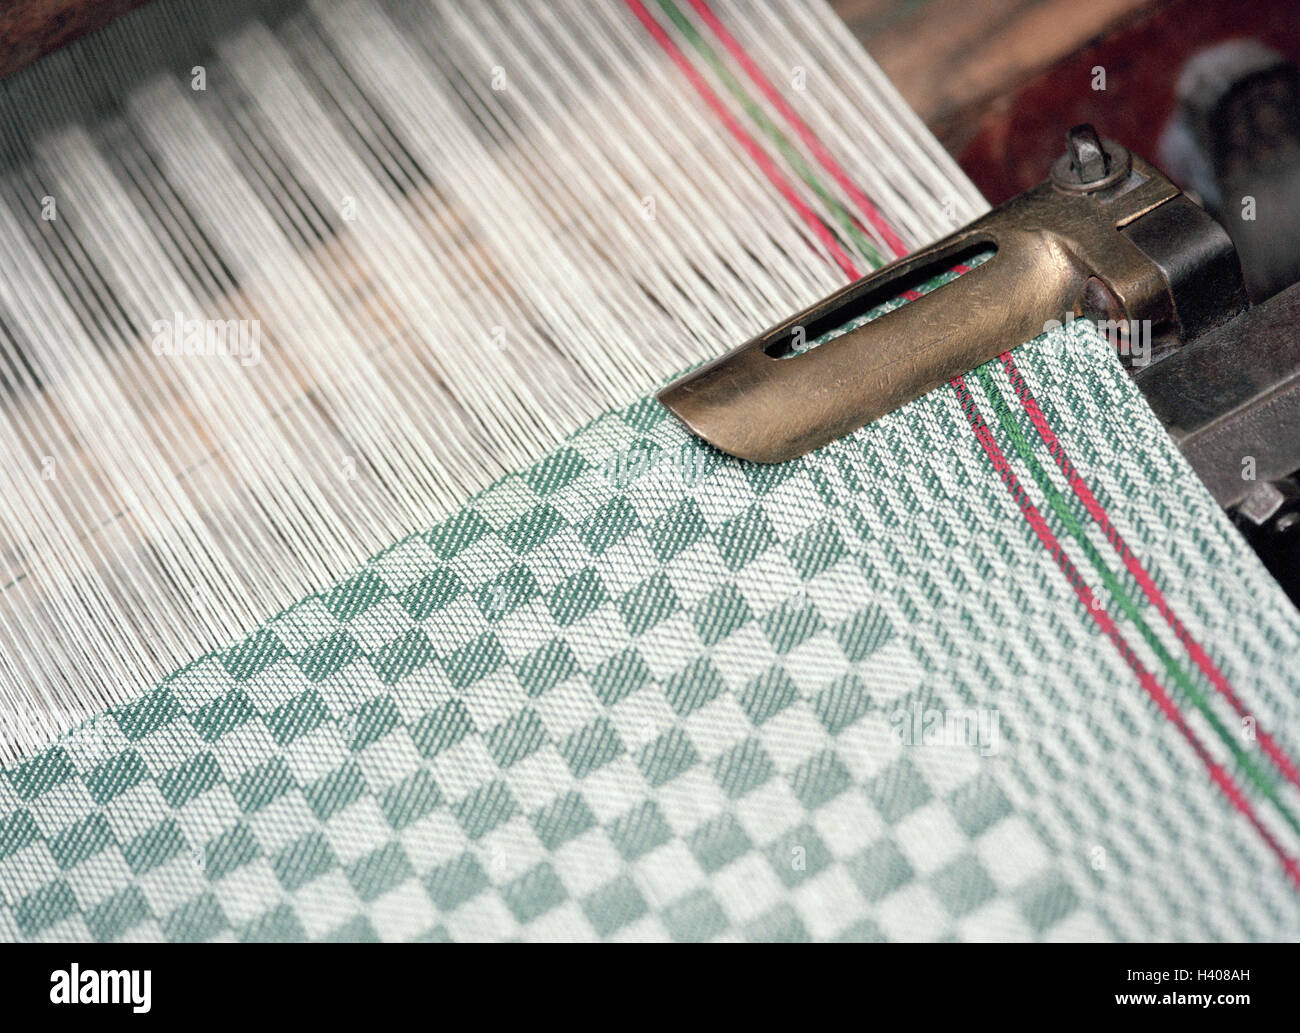 Loom, detail, production, substance, economy, industry, craft, manual labour, textile industry, substance production, by machine, substance production, weaving mill, industrial loom, nostalgically, nostalgia, traditionally, factory, substance, thread, min Stock Photo